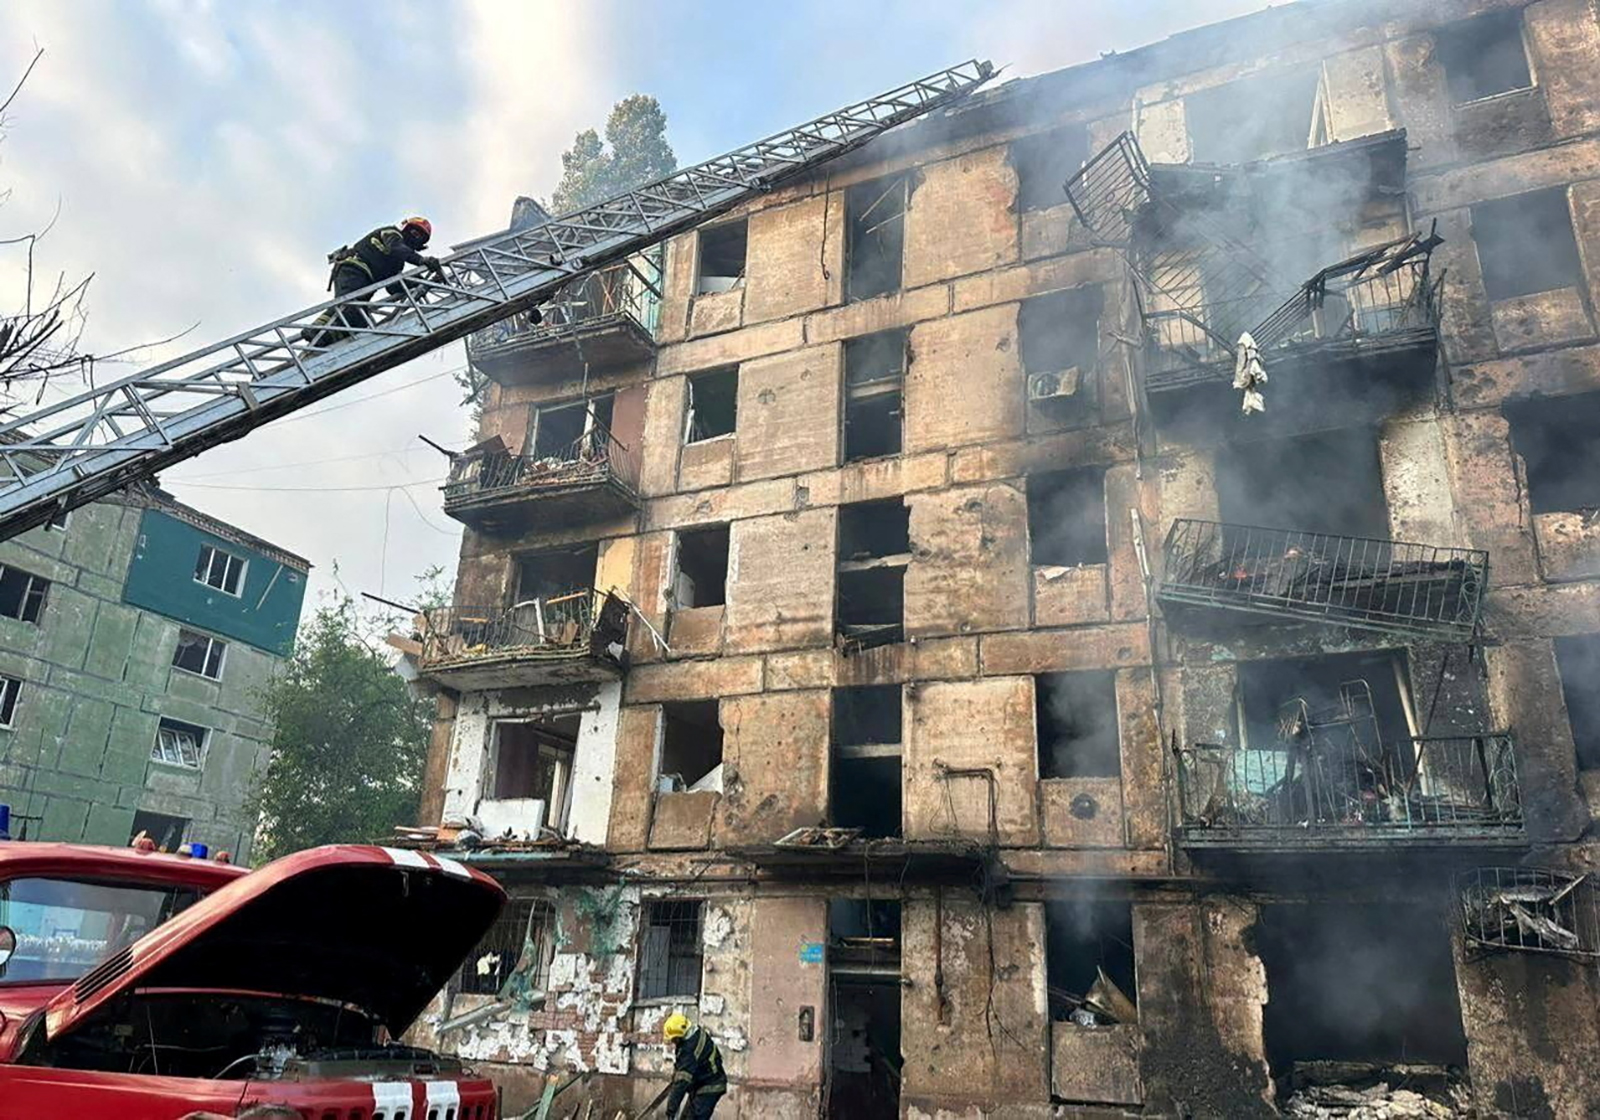 Rescuers work at a site of a residential building heavily damaged by a Russian missile strike in Kryvyi Rih, Dnipropetrovsk region, Ukraine on June 13.